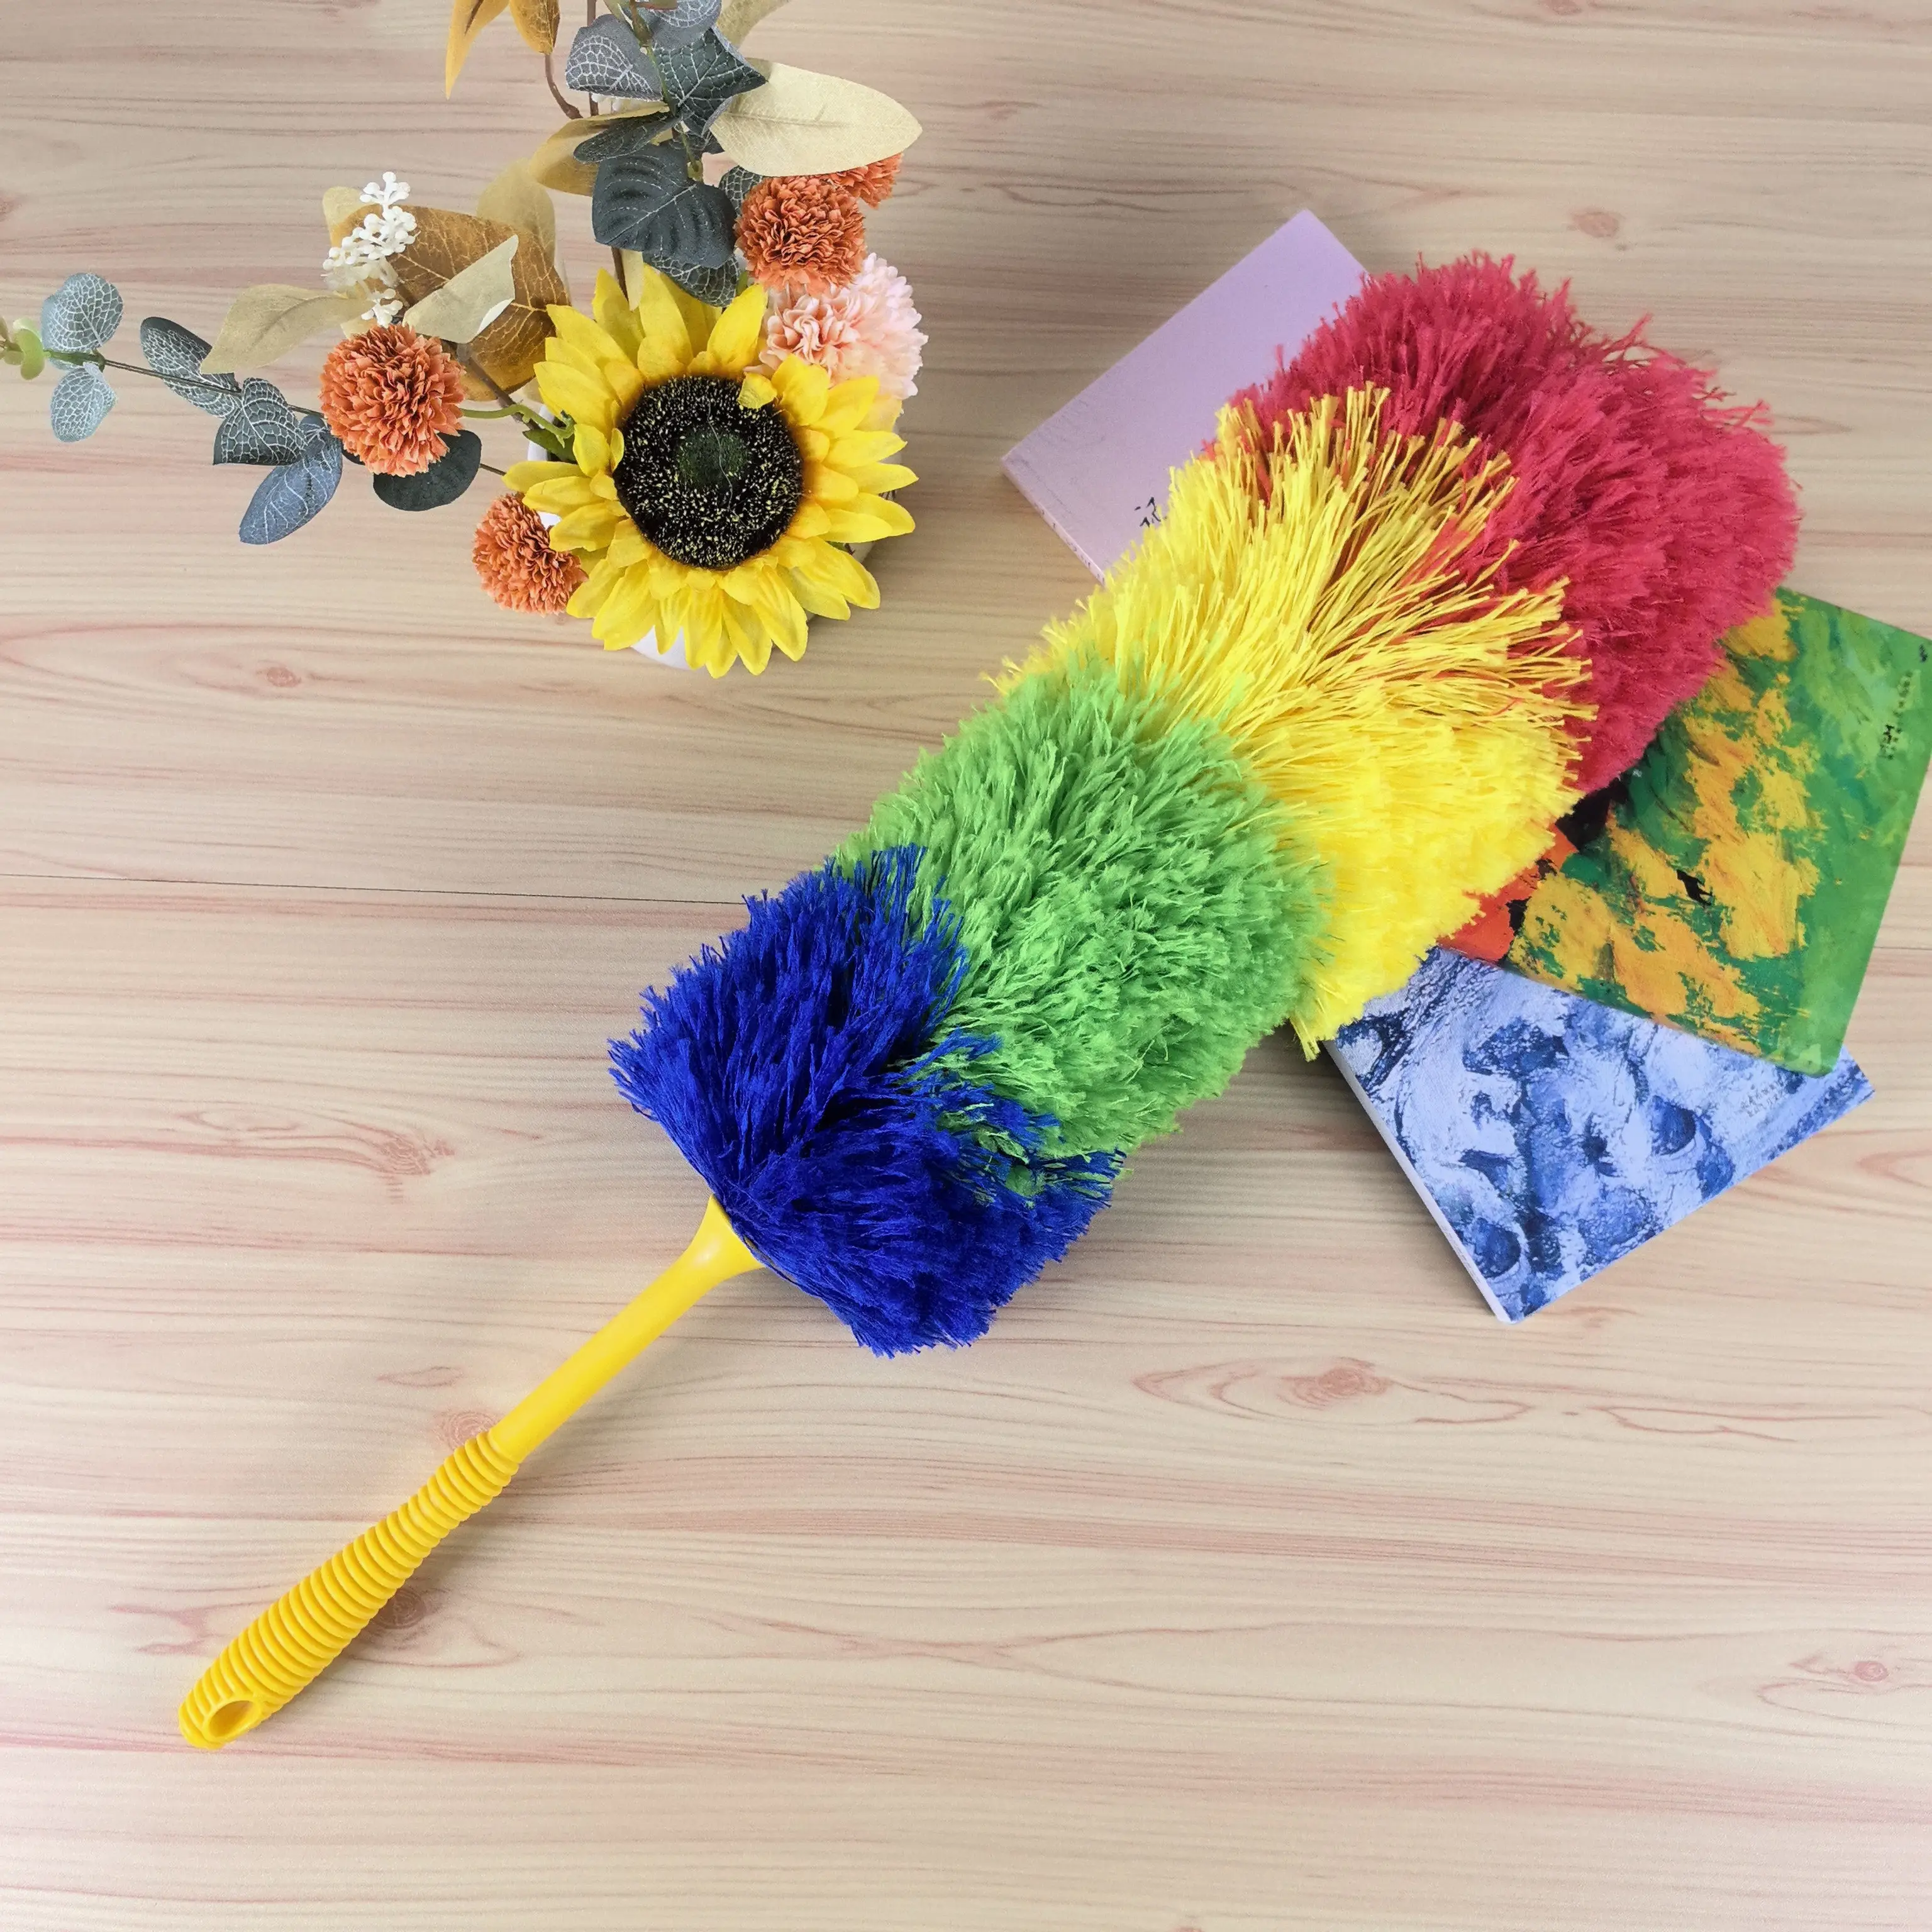 Fluffy Microfiber Duster Nylon Duster Feather Duster Kit Household Washable Cleaning Brush for House Cleaning